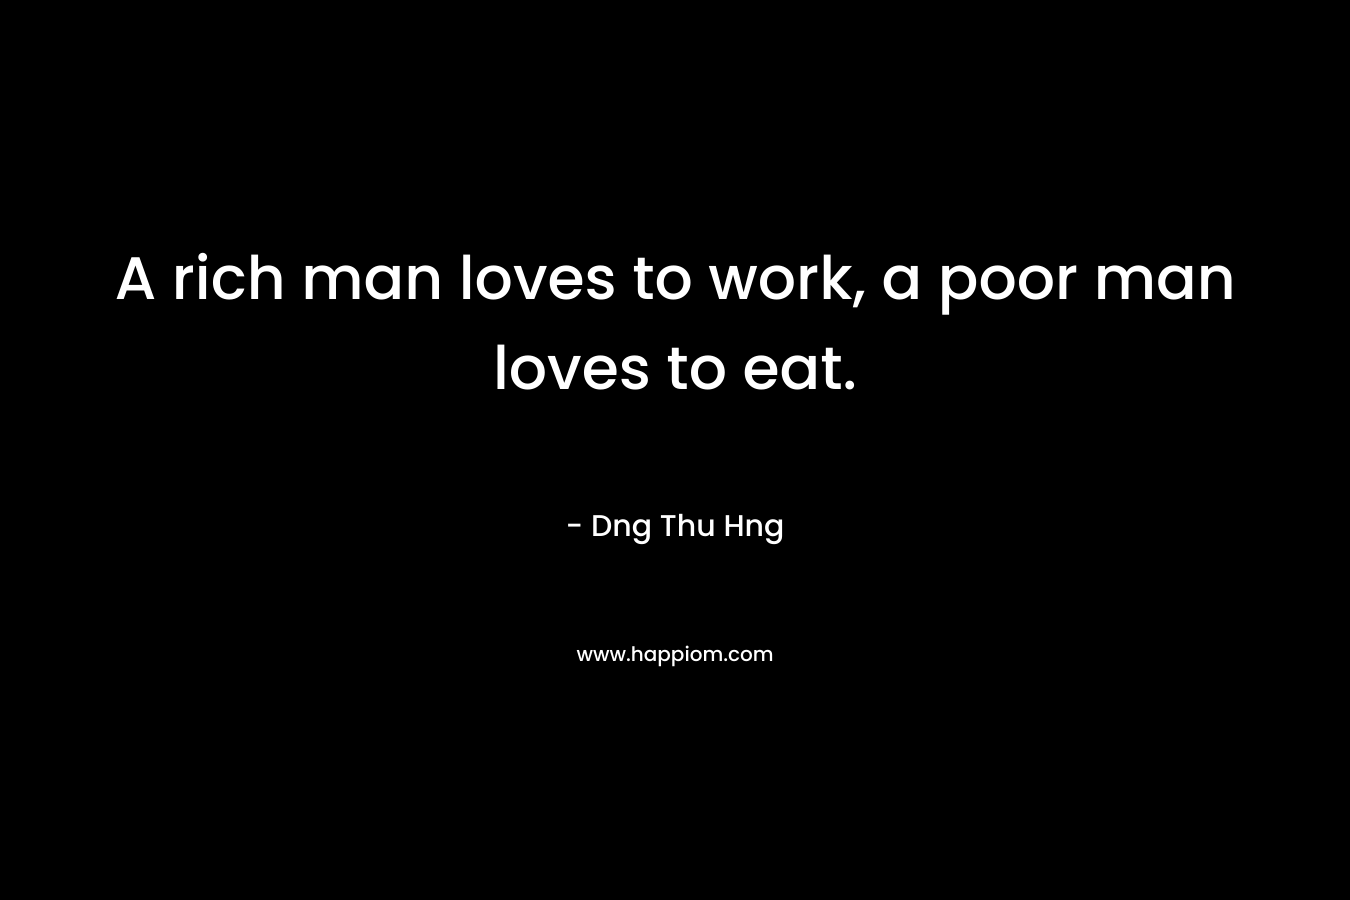 A rich man loves to work, a poor man loves to eat.